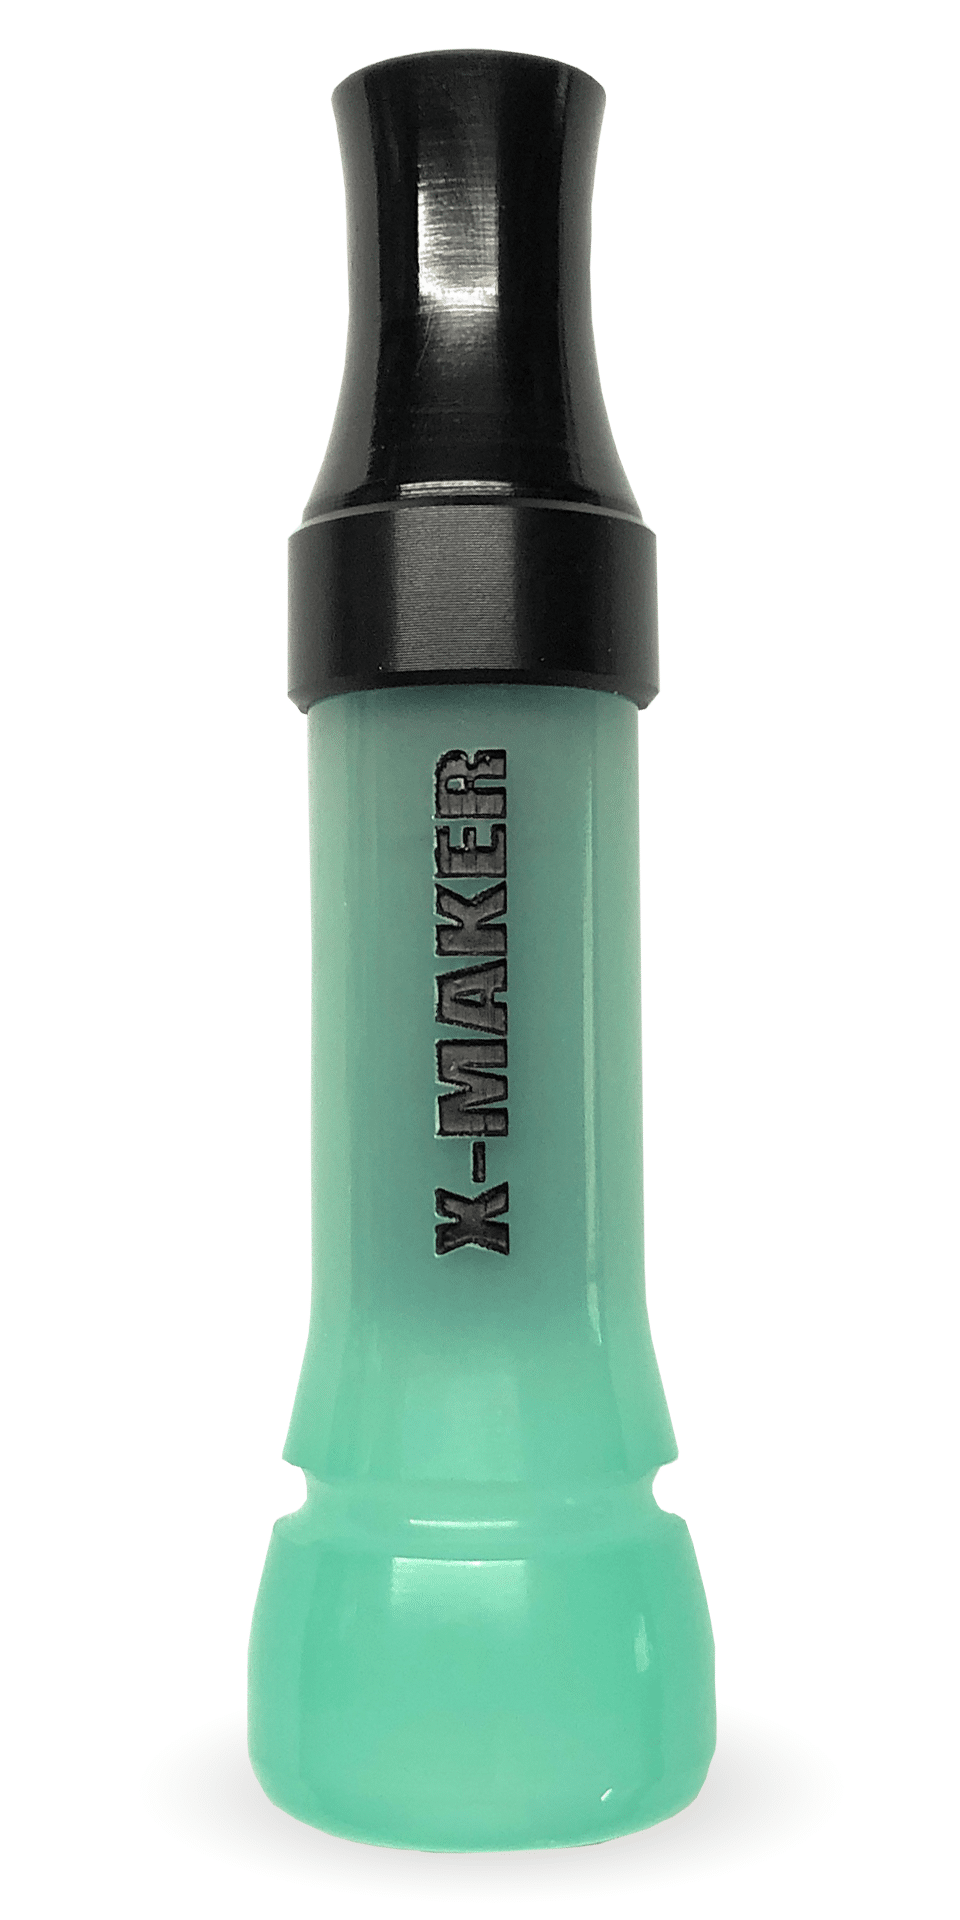 Introducing the X-MAKER Cut-Down Duck Call in striking Jade, featuring a Black Anodized Band and a Threaded Cast Acrylic Flared Keyhole Insert. Engineered for exceptional responsiveness, it delivers outstanding high and low-end tones, boasting a loud, smooth, and user-friendly performance. Each call is meticulously designed, cut, tuned, and sold by Kirk McCullough. Proudly made on the great Mississippi flyway in Arkansas.